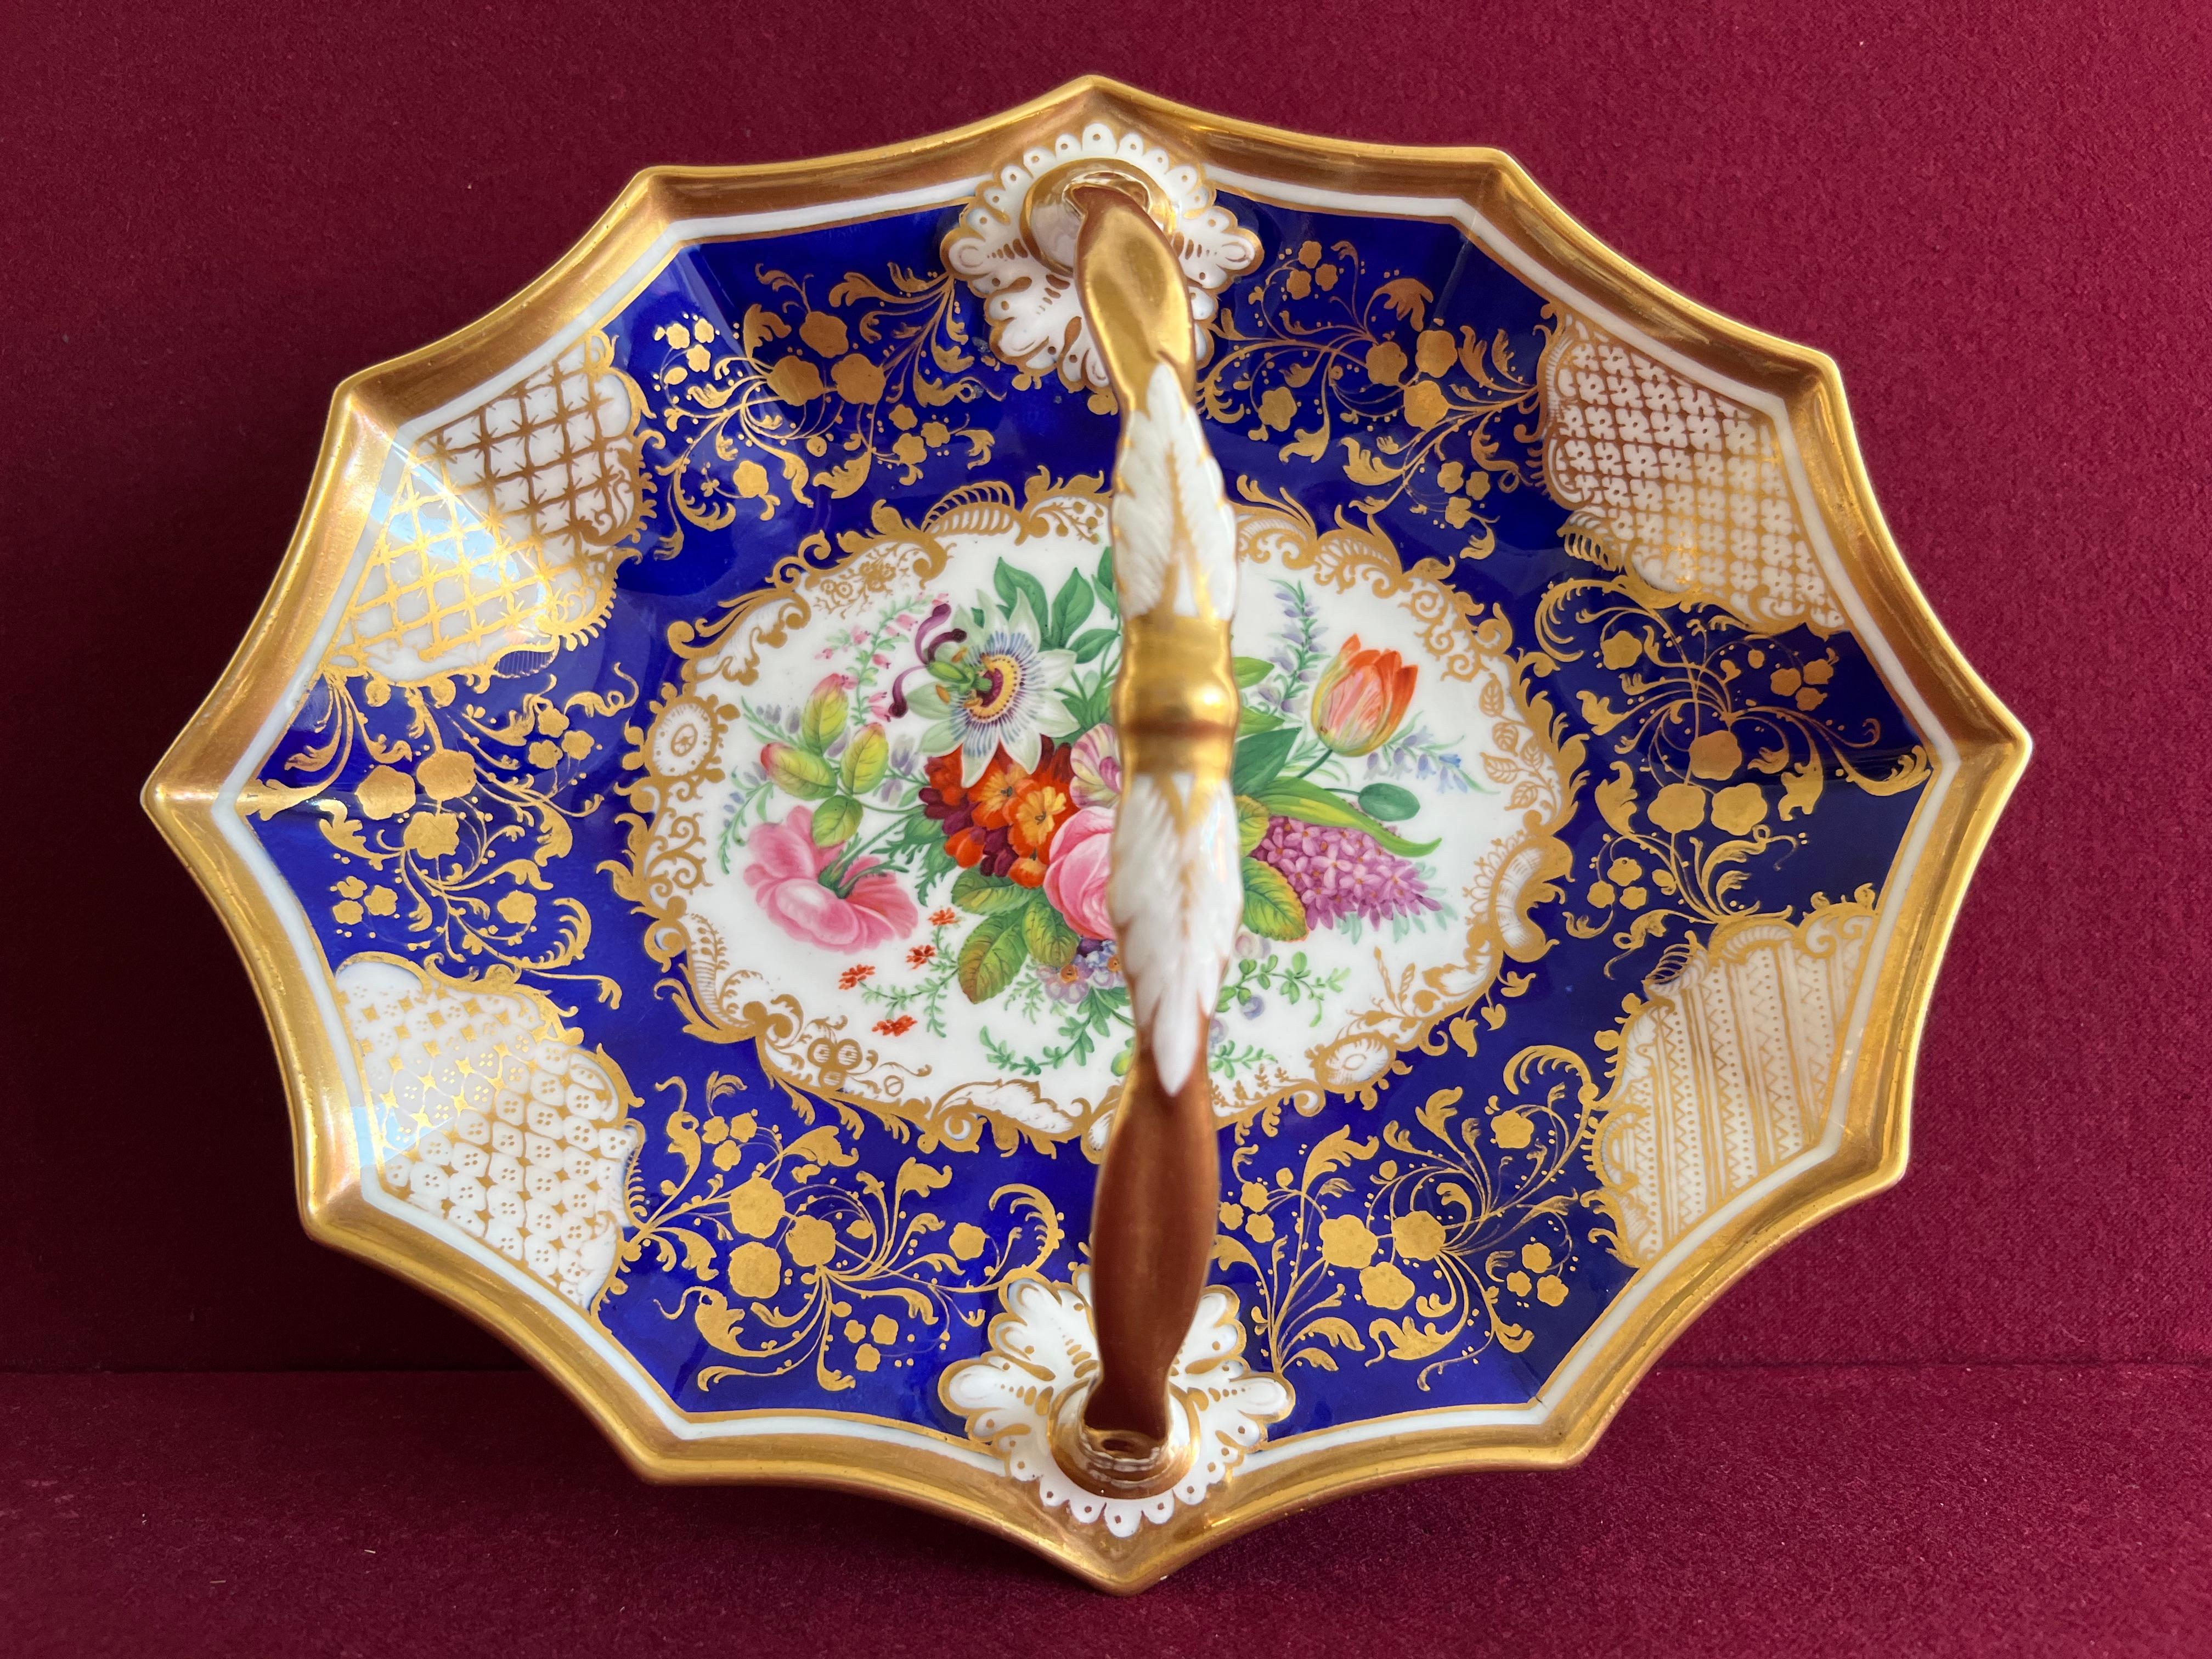 A fine Chamberlain Worcester & Co porcelain basket c.1840-45. Finely decorated with a well painted floral bouquet to the centre. The border decorated with a deep blue ground and a gilt foliate design and white panels with hatched gilding. Gilded